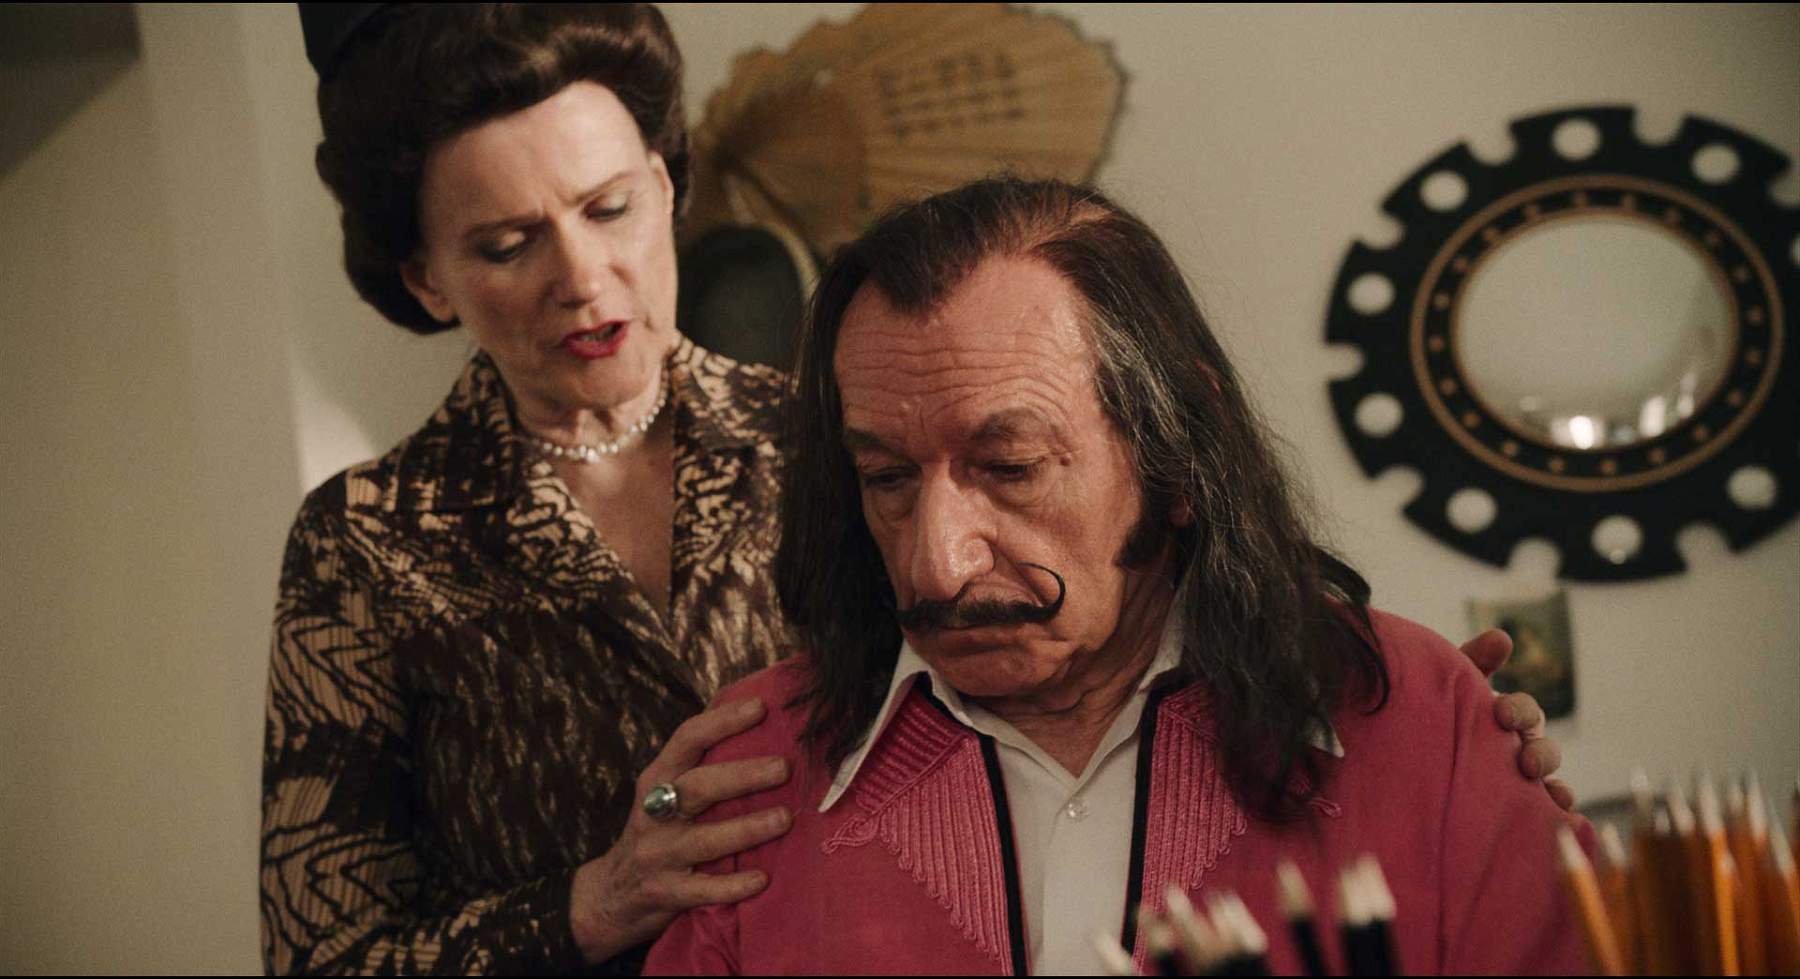 DalÃ­land, the biopic about Salvador DalÃ­, arrives in theaters.